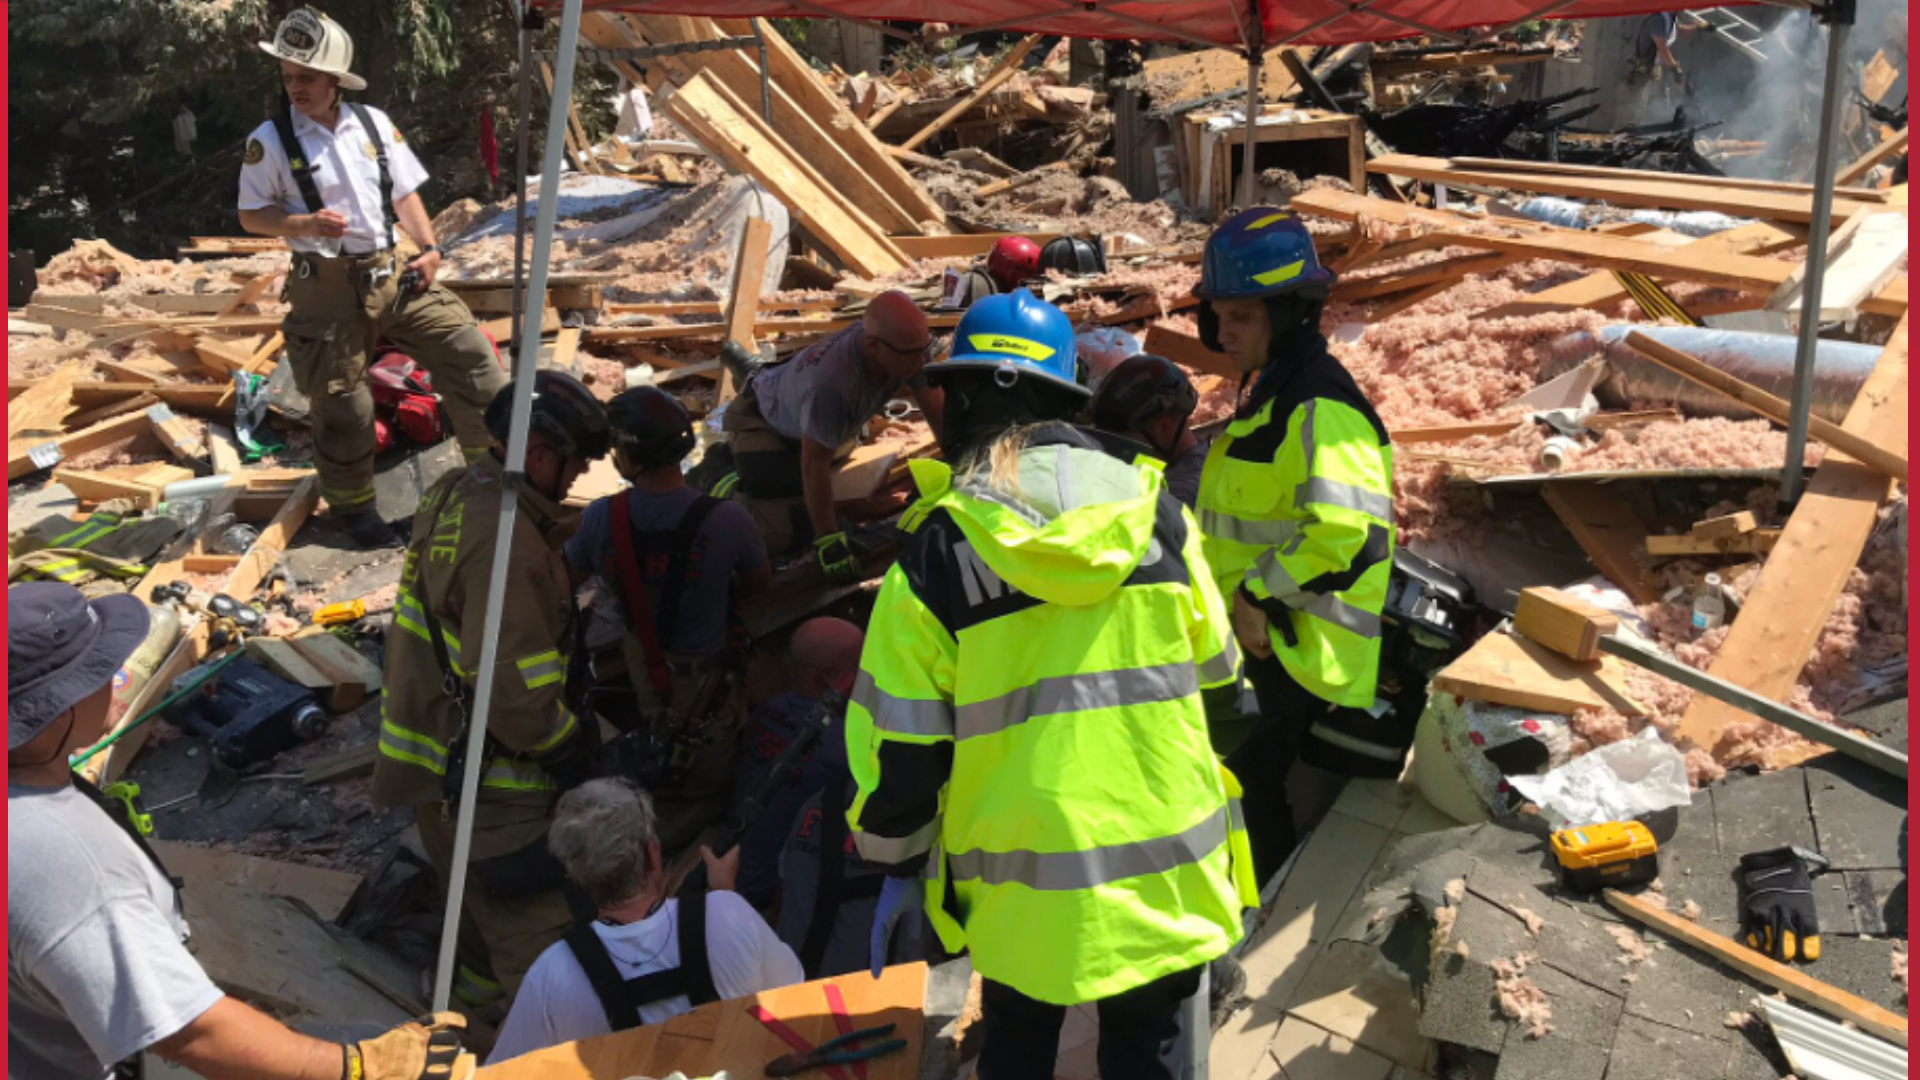 Pictures and videos have been pouring into the newsroom showing different views of the devastation in Ballantyne following a home explosion.